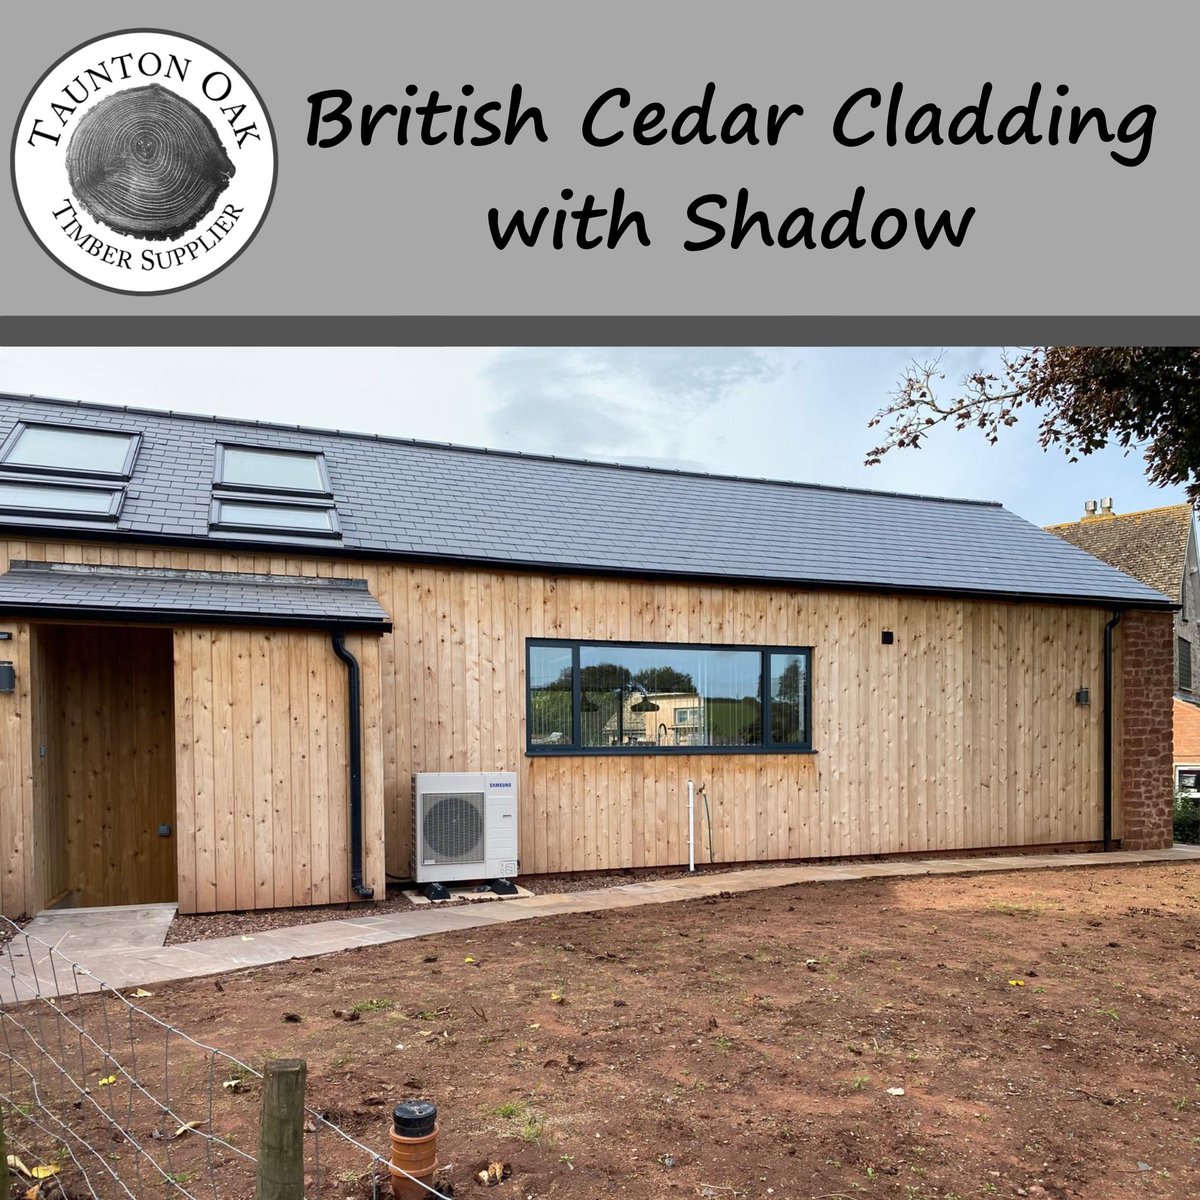 British cedar cladding with shadow for this beautiful house extension.
Supplied by Taunton Oak.
#TauntonOak #Cladding #OakFlooring #SolidOakFlooring #OSMOFinish #BeautifulHome #HouseAHome #NoPlaceLikeHome #HomeFlooring #HomeMakeover #HouseExtension